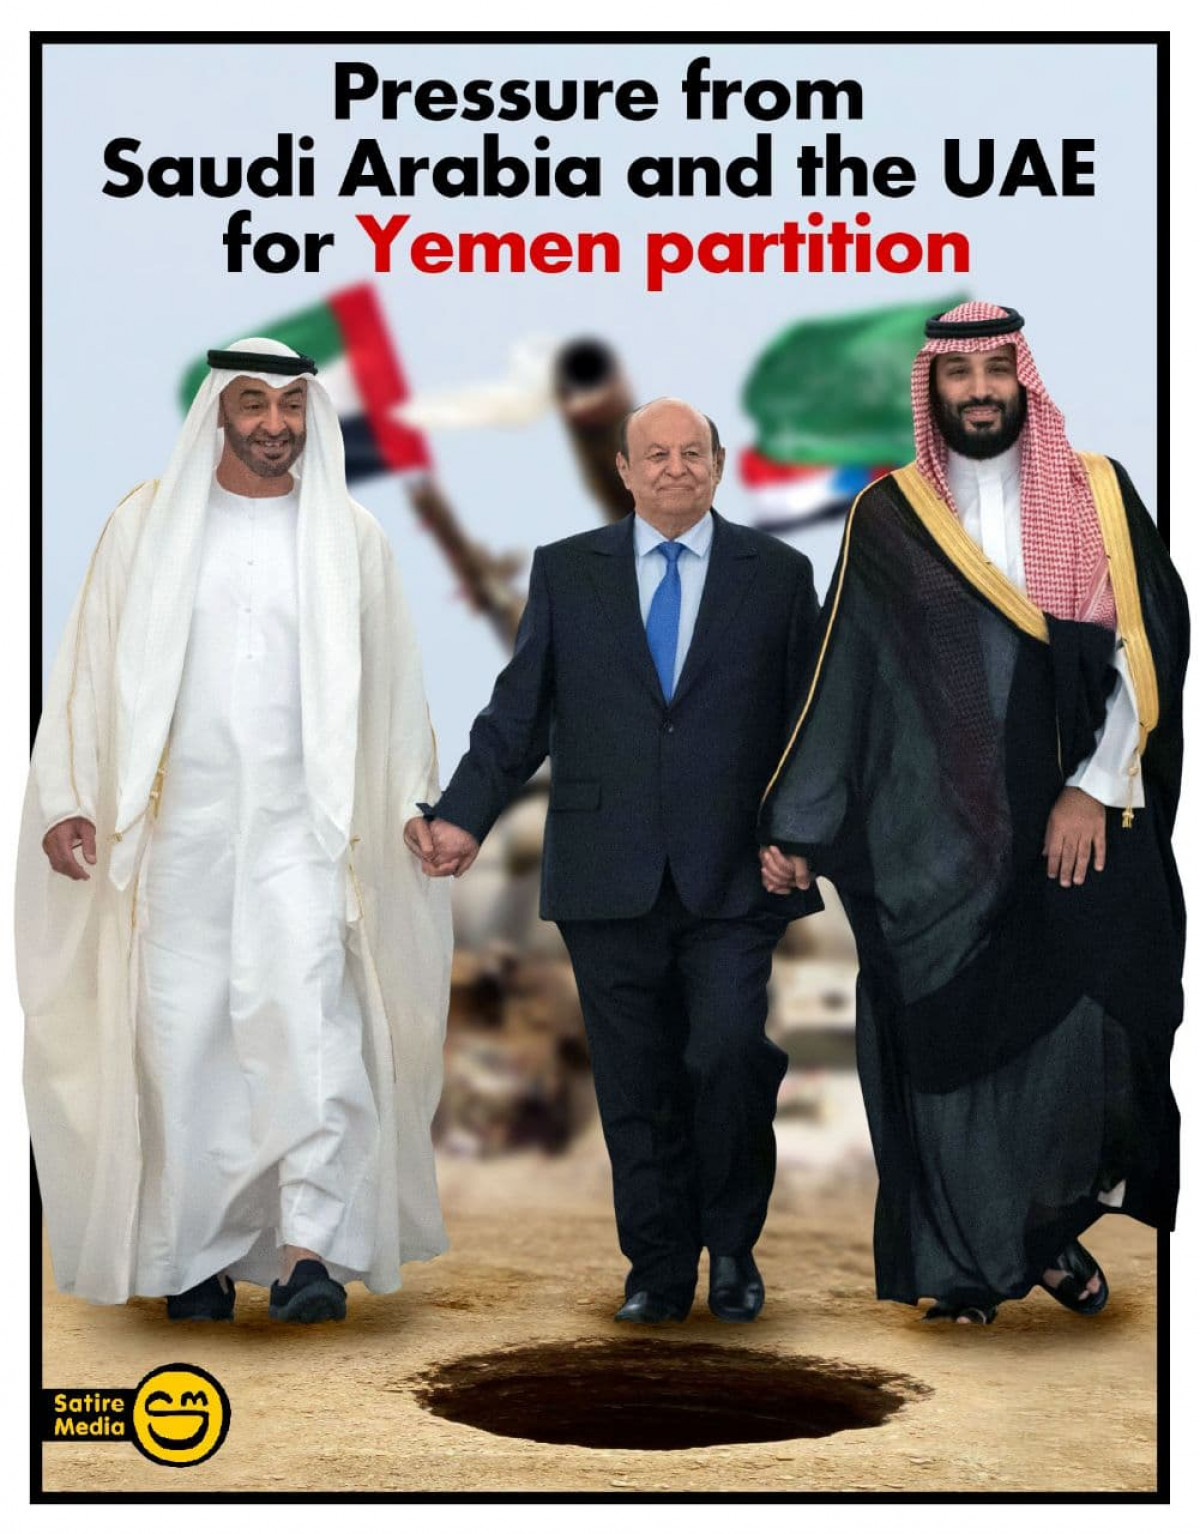 Pressure from Saudi Arabia and the UAE for Yemen partition